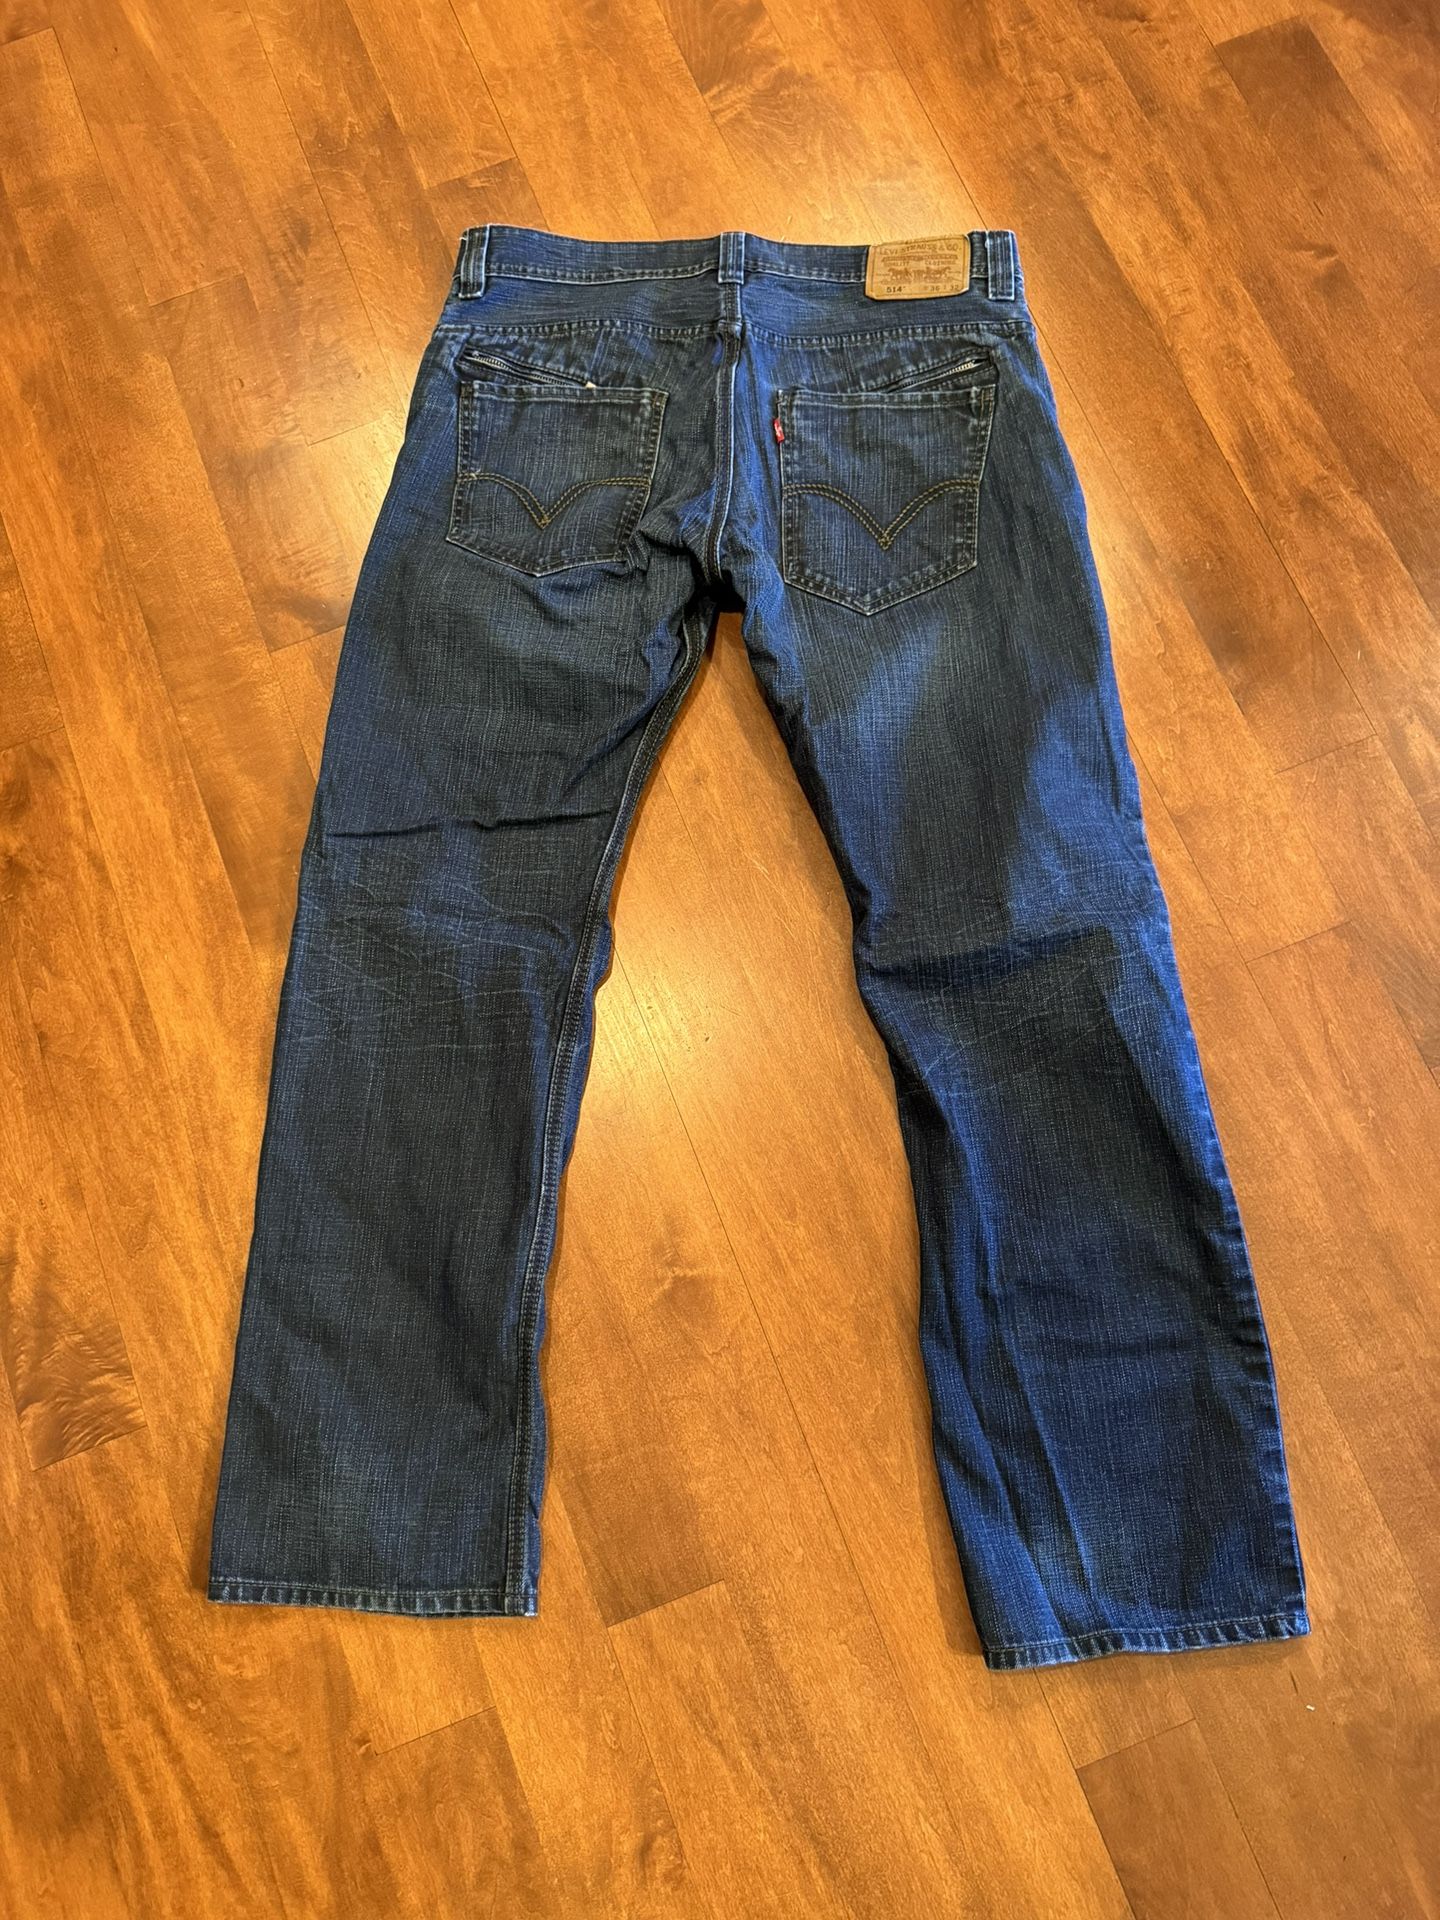 Mens Levi’s 514 Slim Straight Jeans Shipping Available 